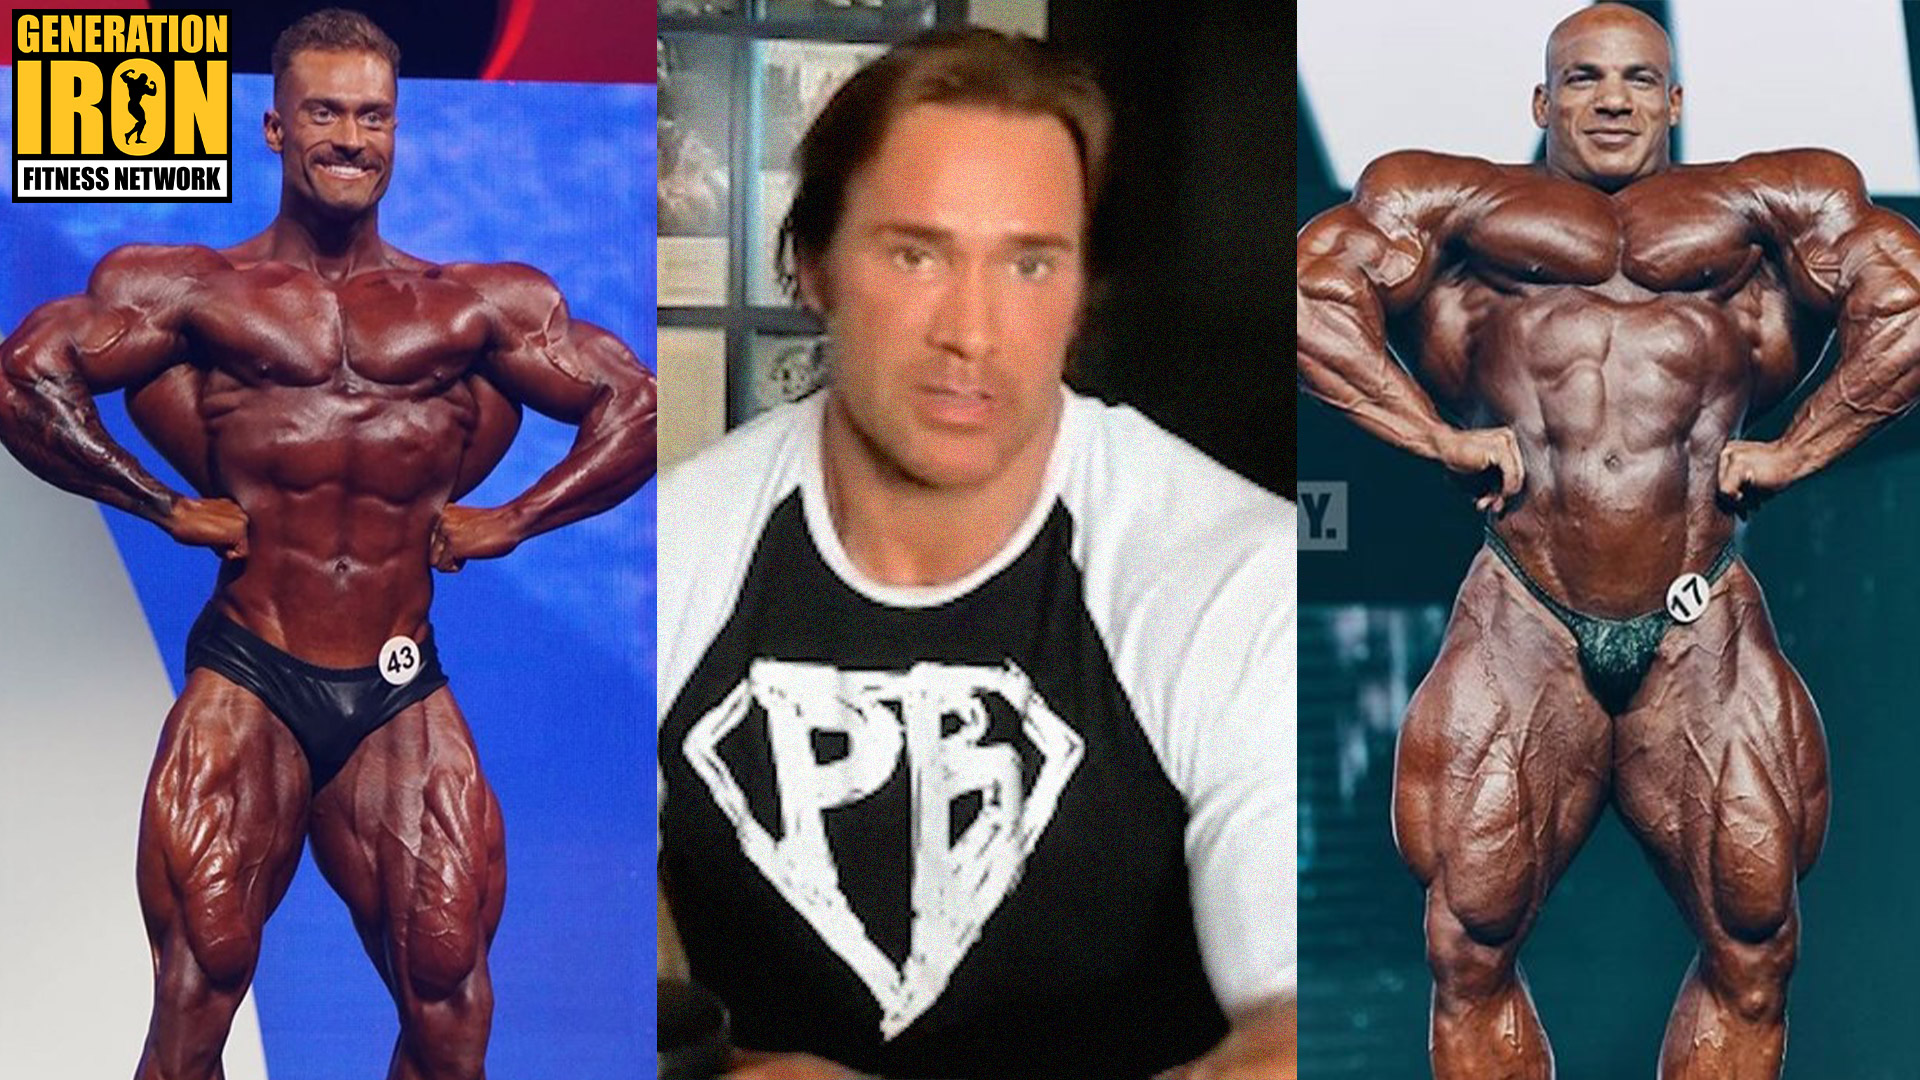 Mike-OHearn-Mens-Open-Vs-Classic-Physique-YT-CLEAN.jpg